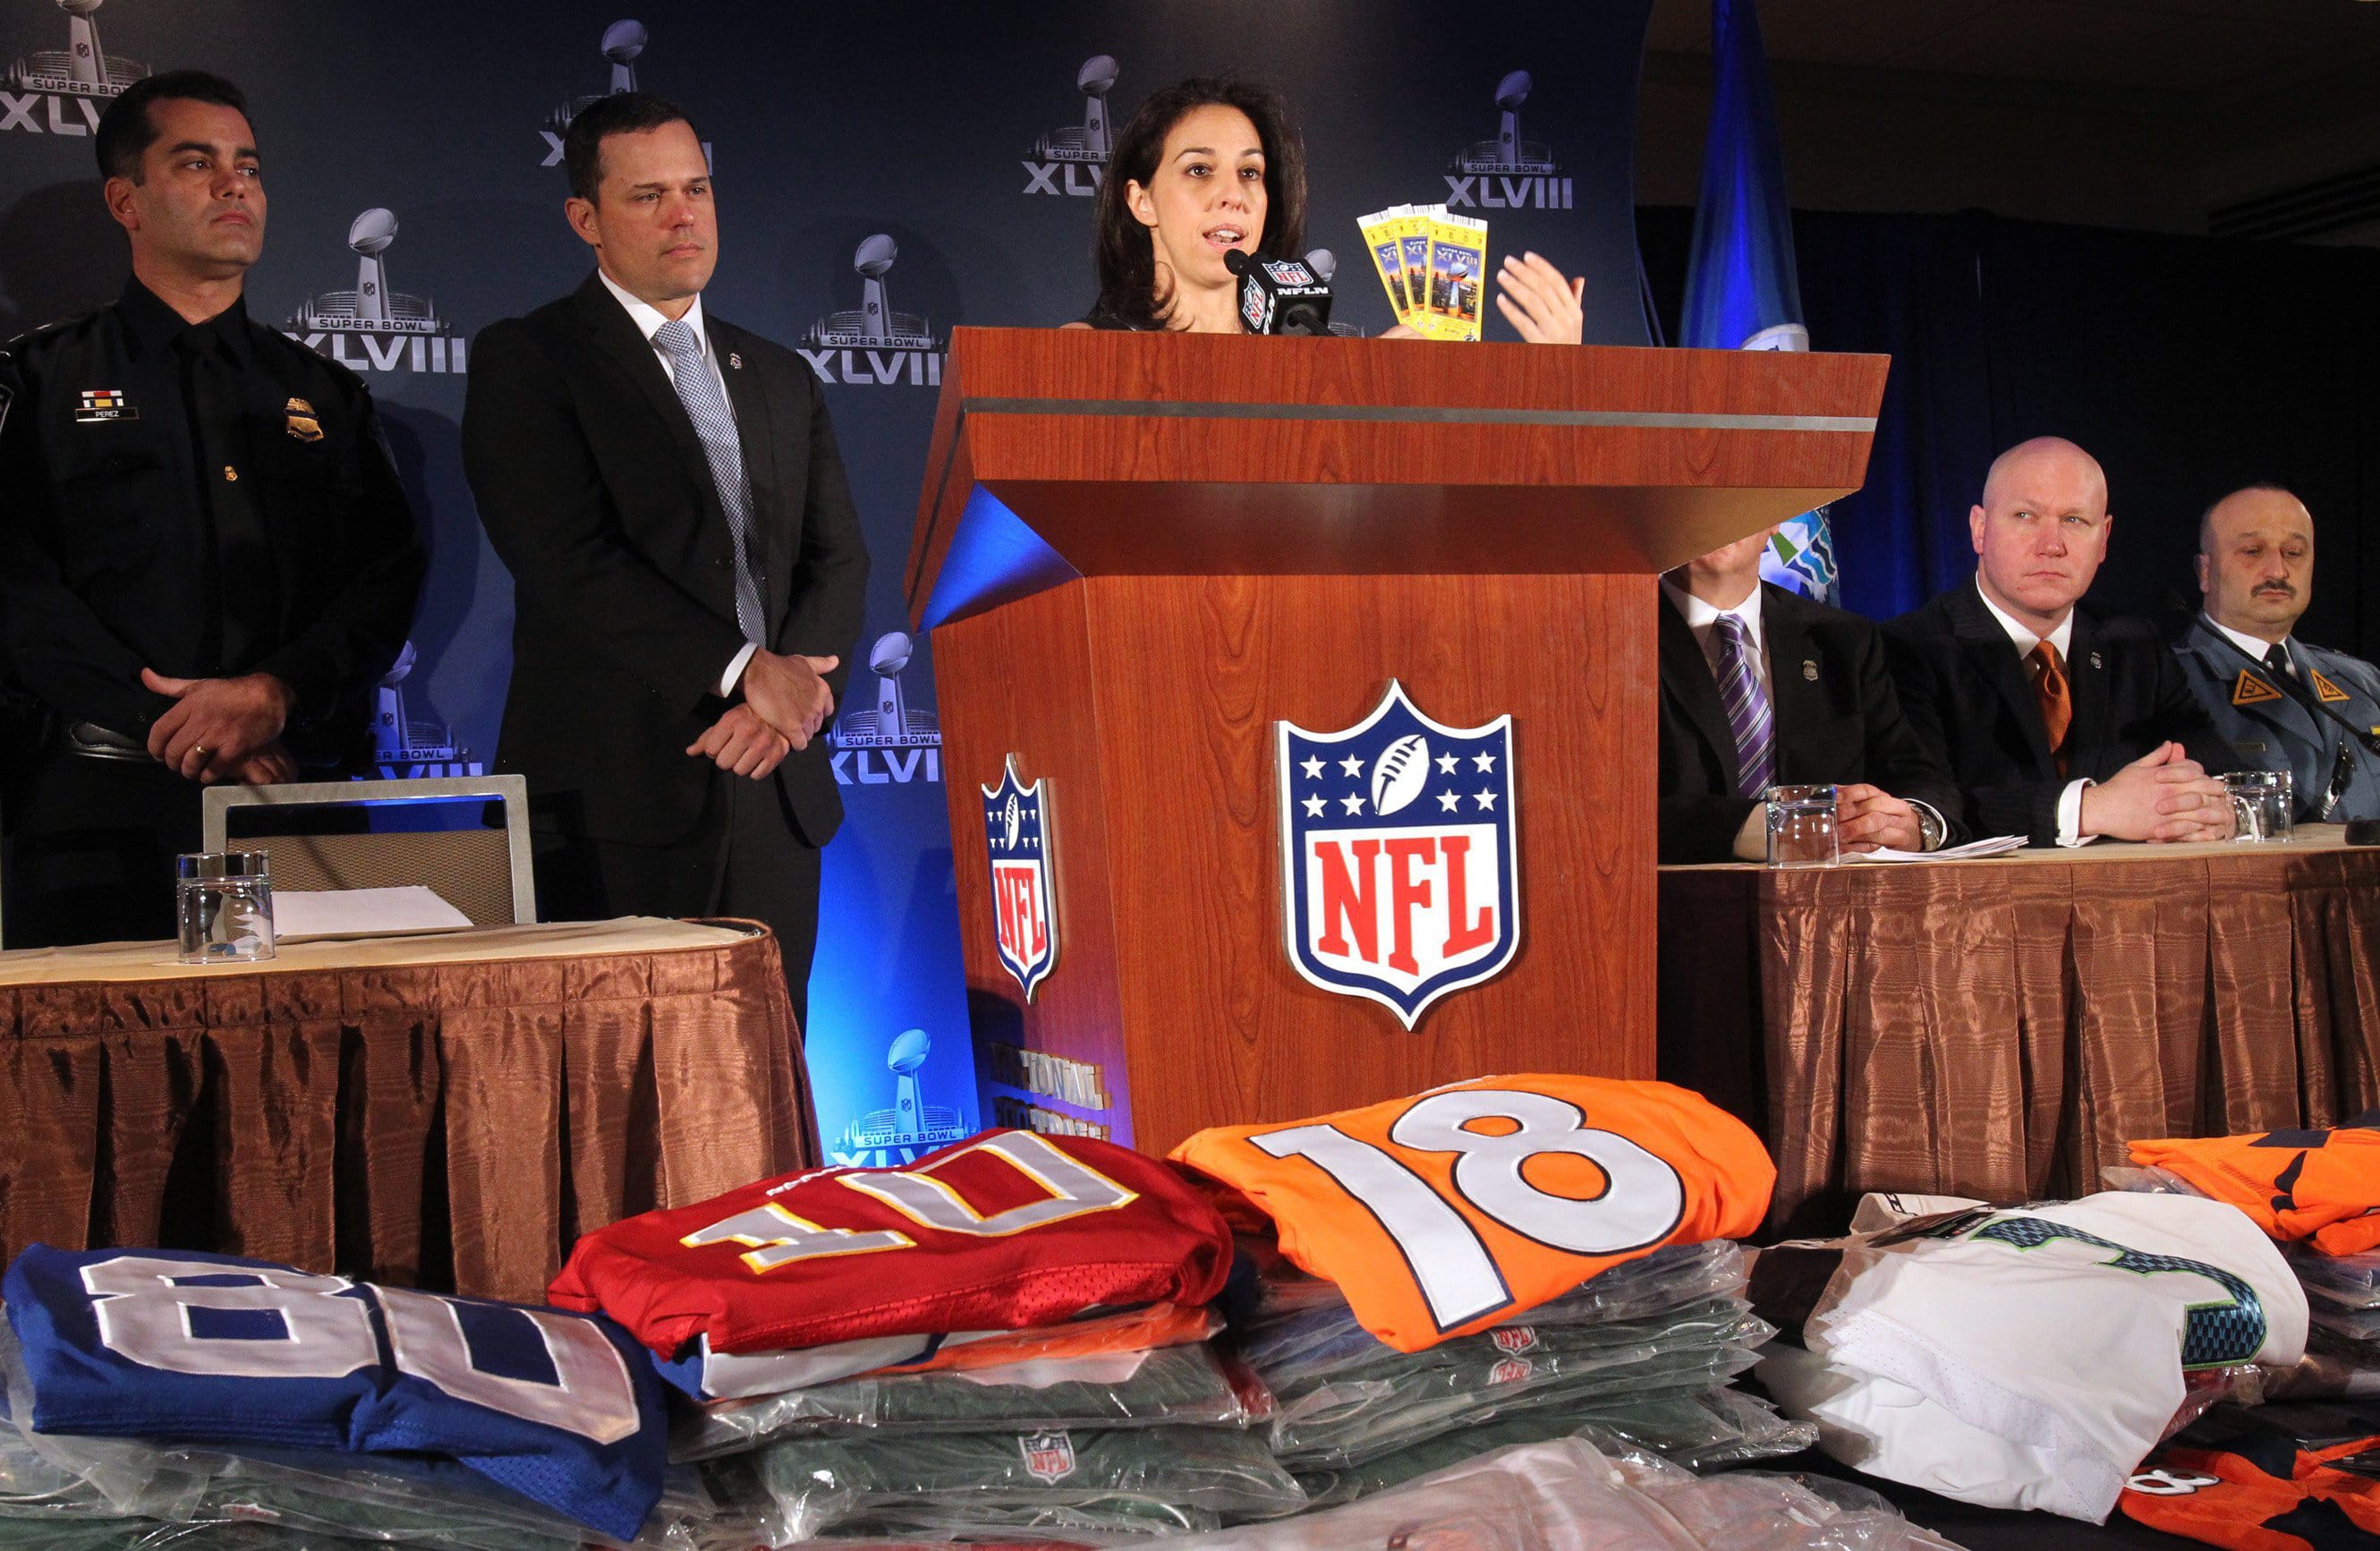 During the &quot;Operation Team Player&quot; press conference Thursday in Manhattan, NFL official Anastasia Danias said fake Super Bowl tickets should be a big concern to purchasers.